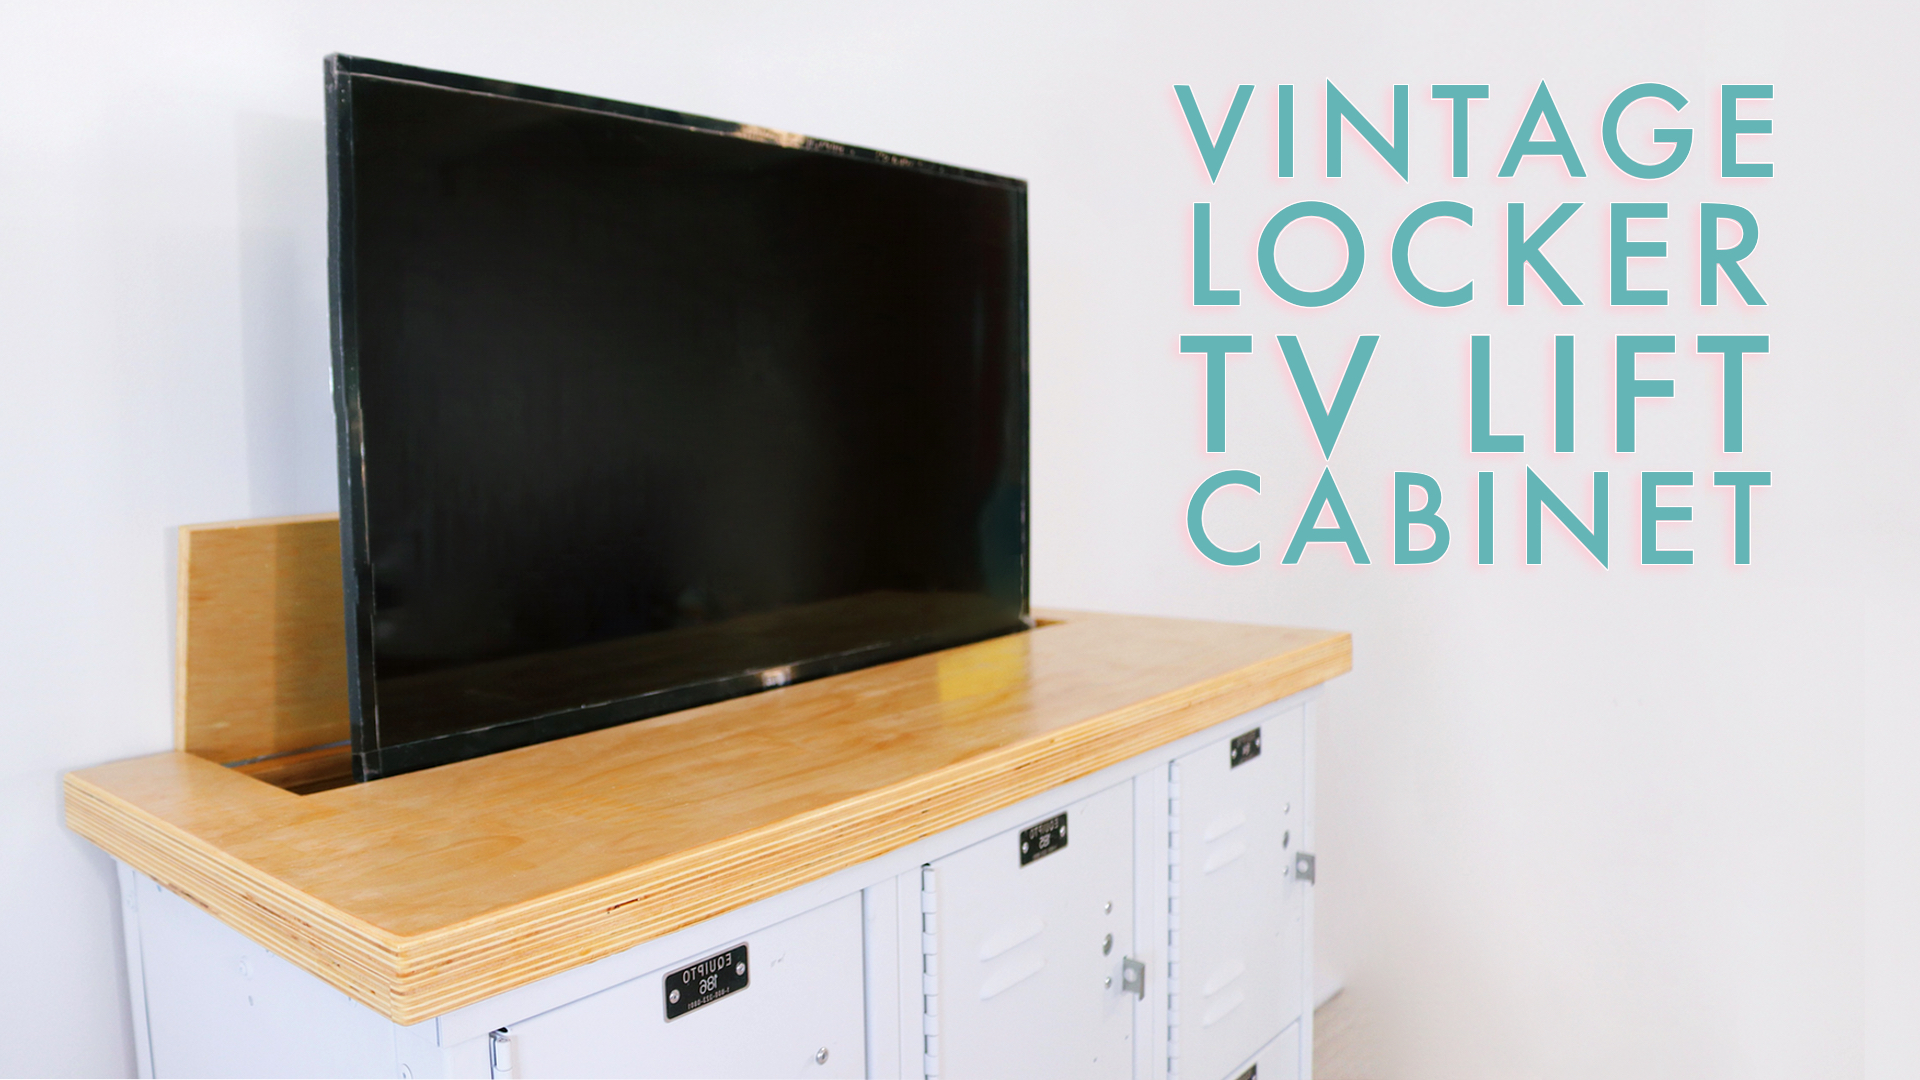  Vintage Lockers Turned into a TV Lift Cabinet / Media Console by: Mike Montgomery | Modern Builds 